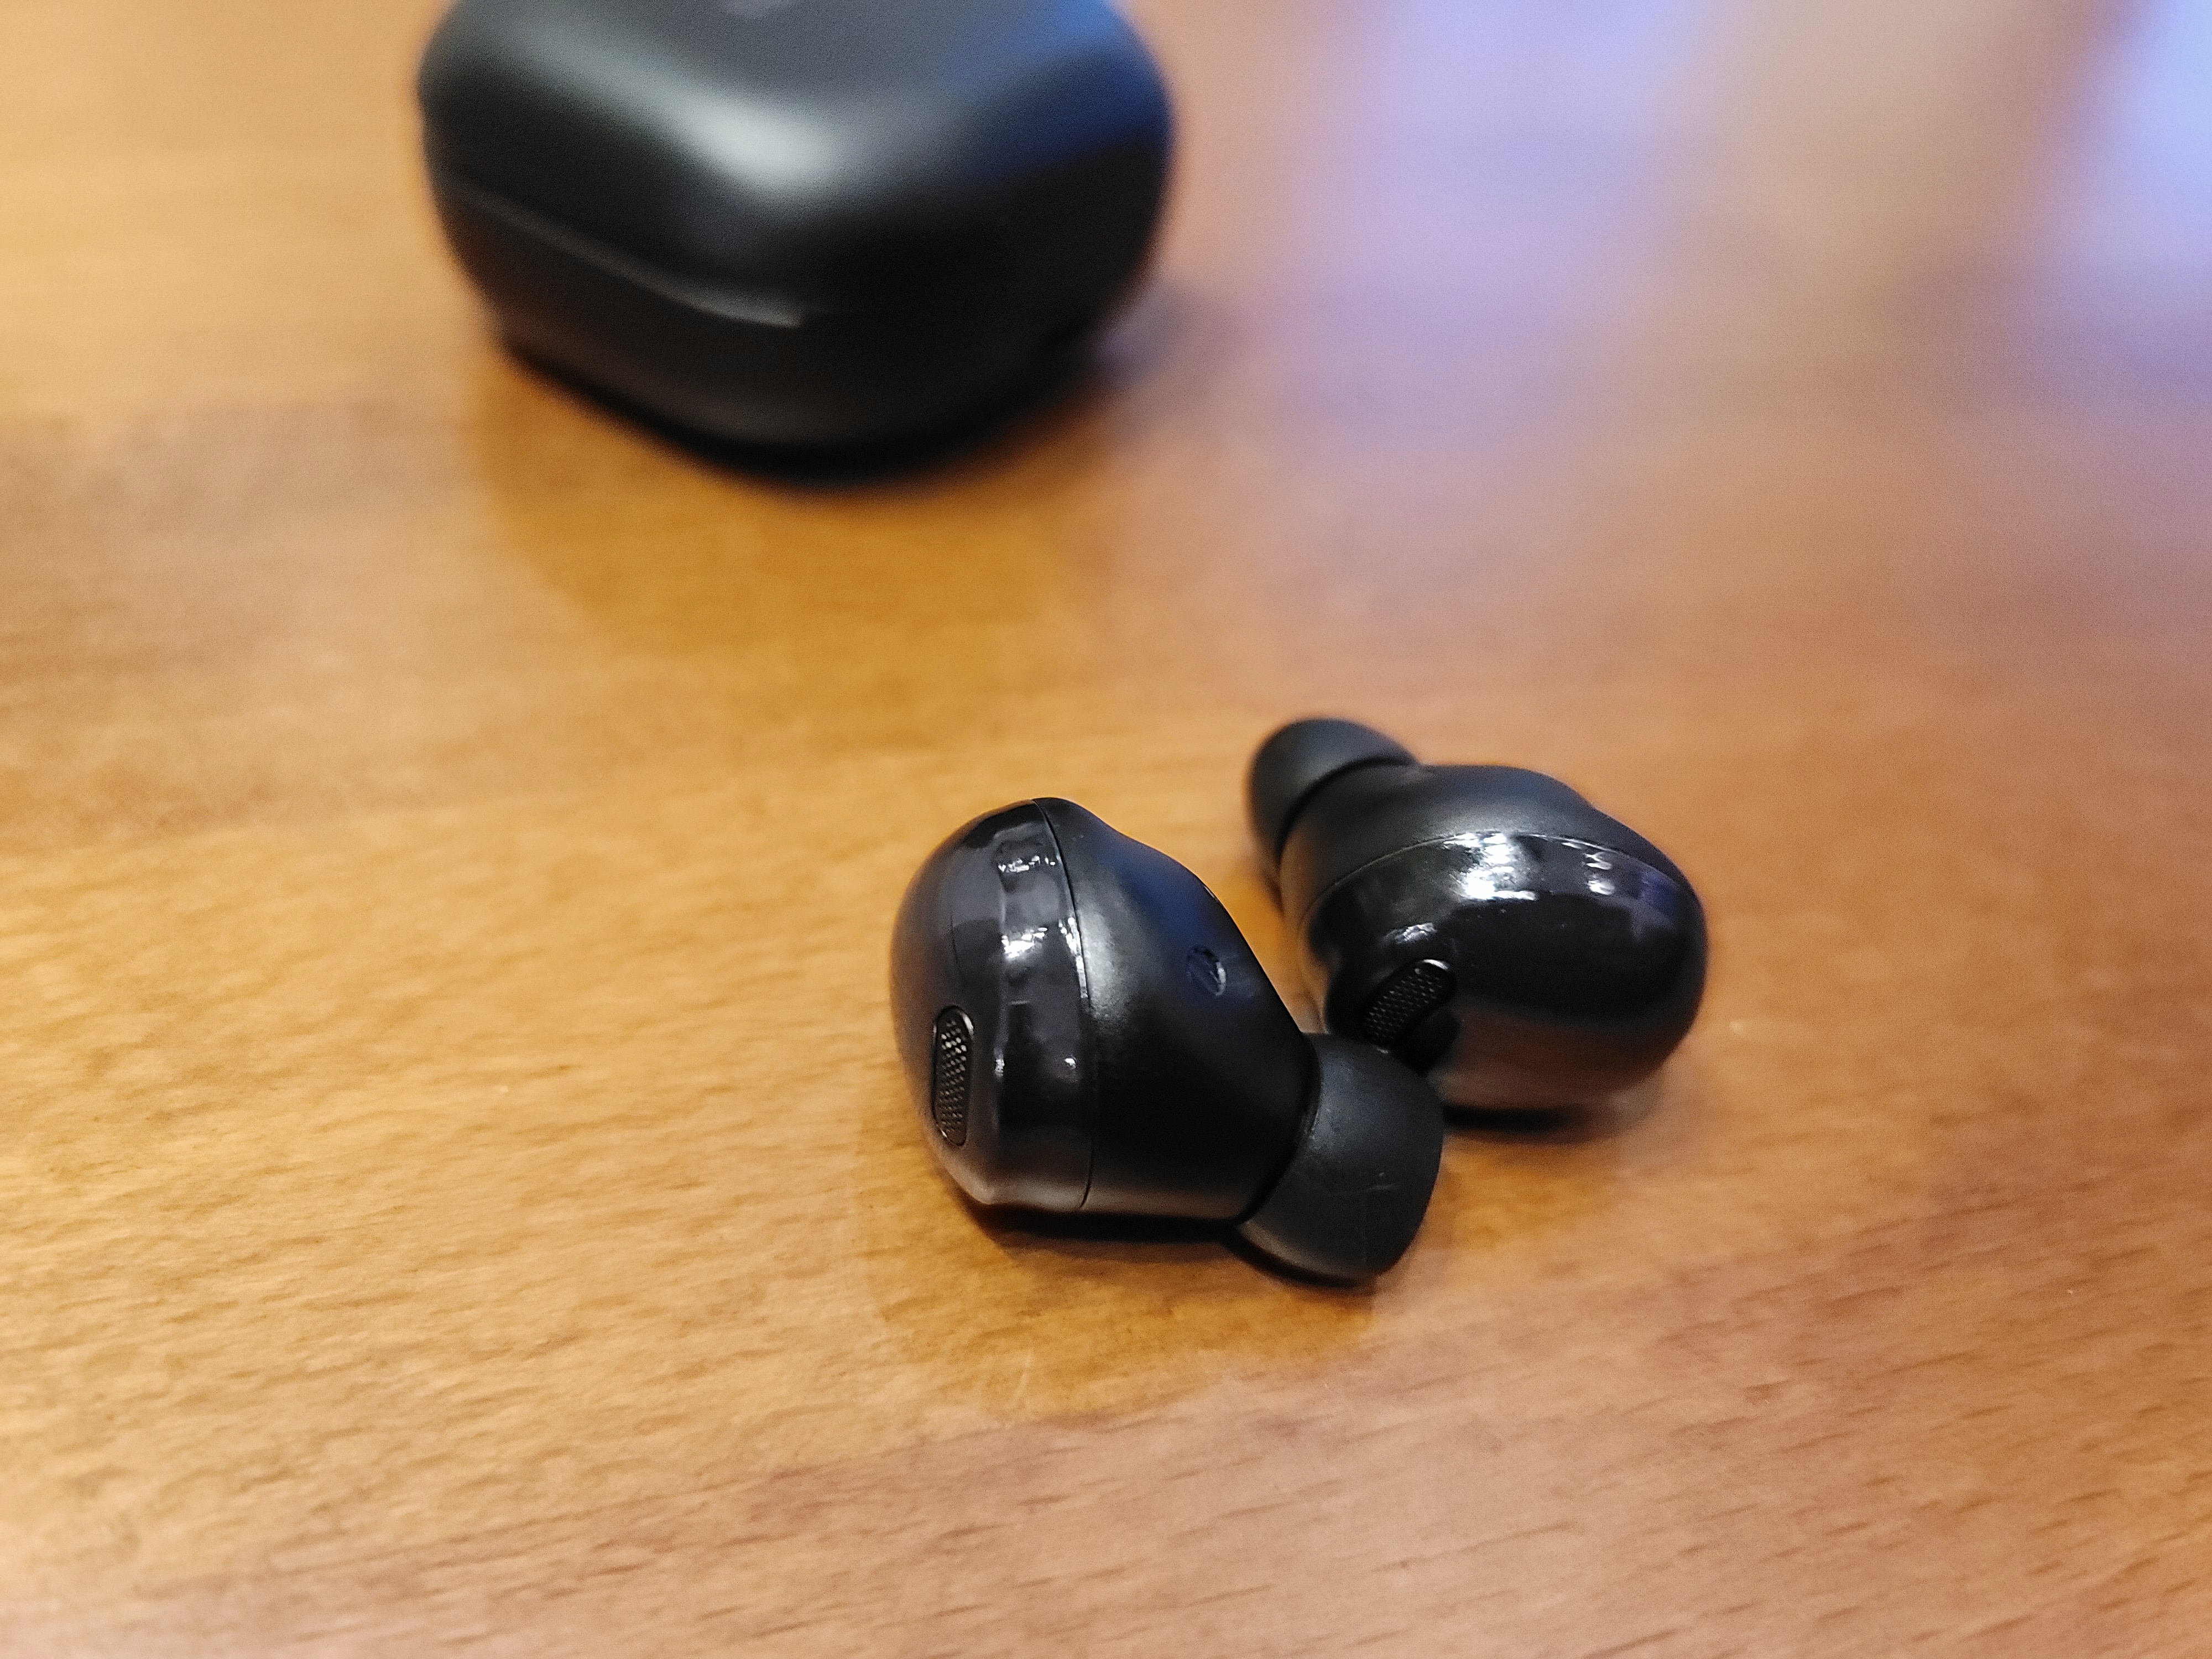 Oceanien Ideelt justere Samsung's Galaxy Buds Pro are a solid AirPods alternative | TechCrunch